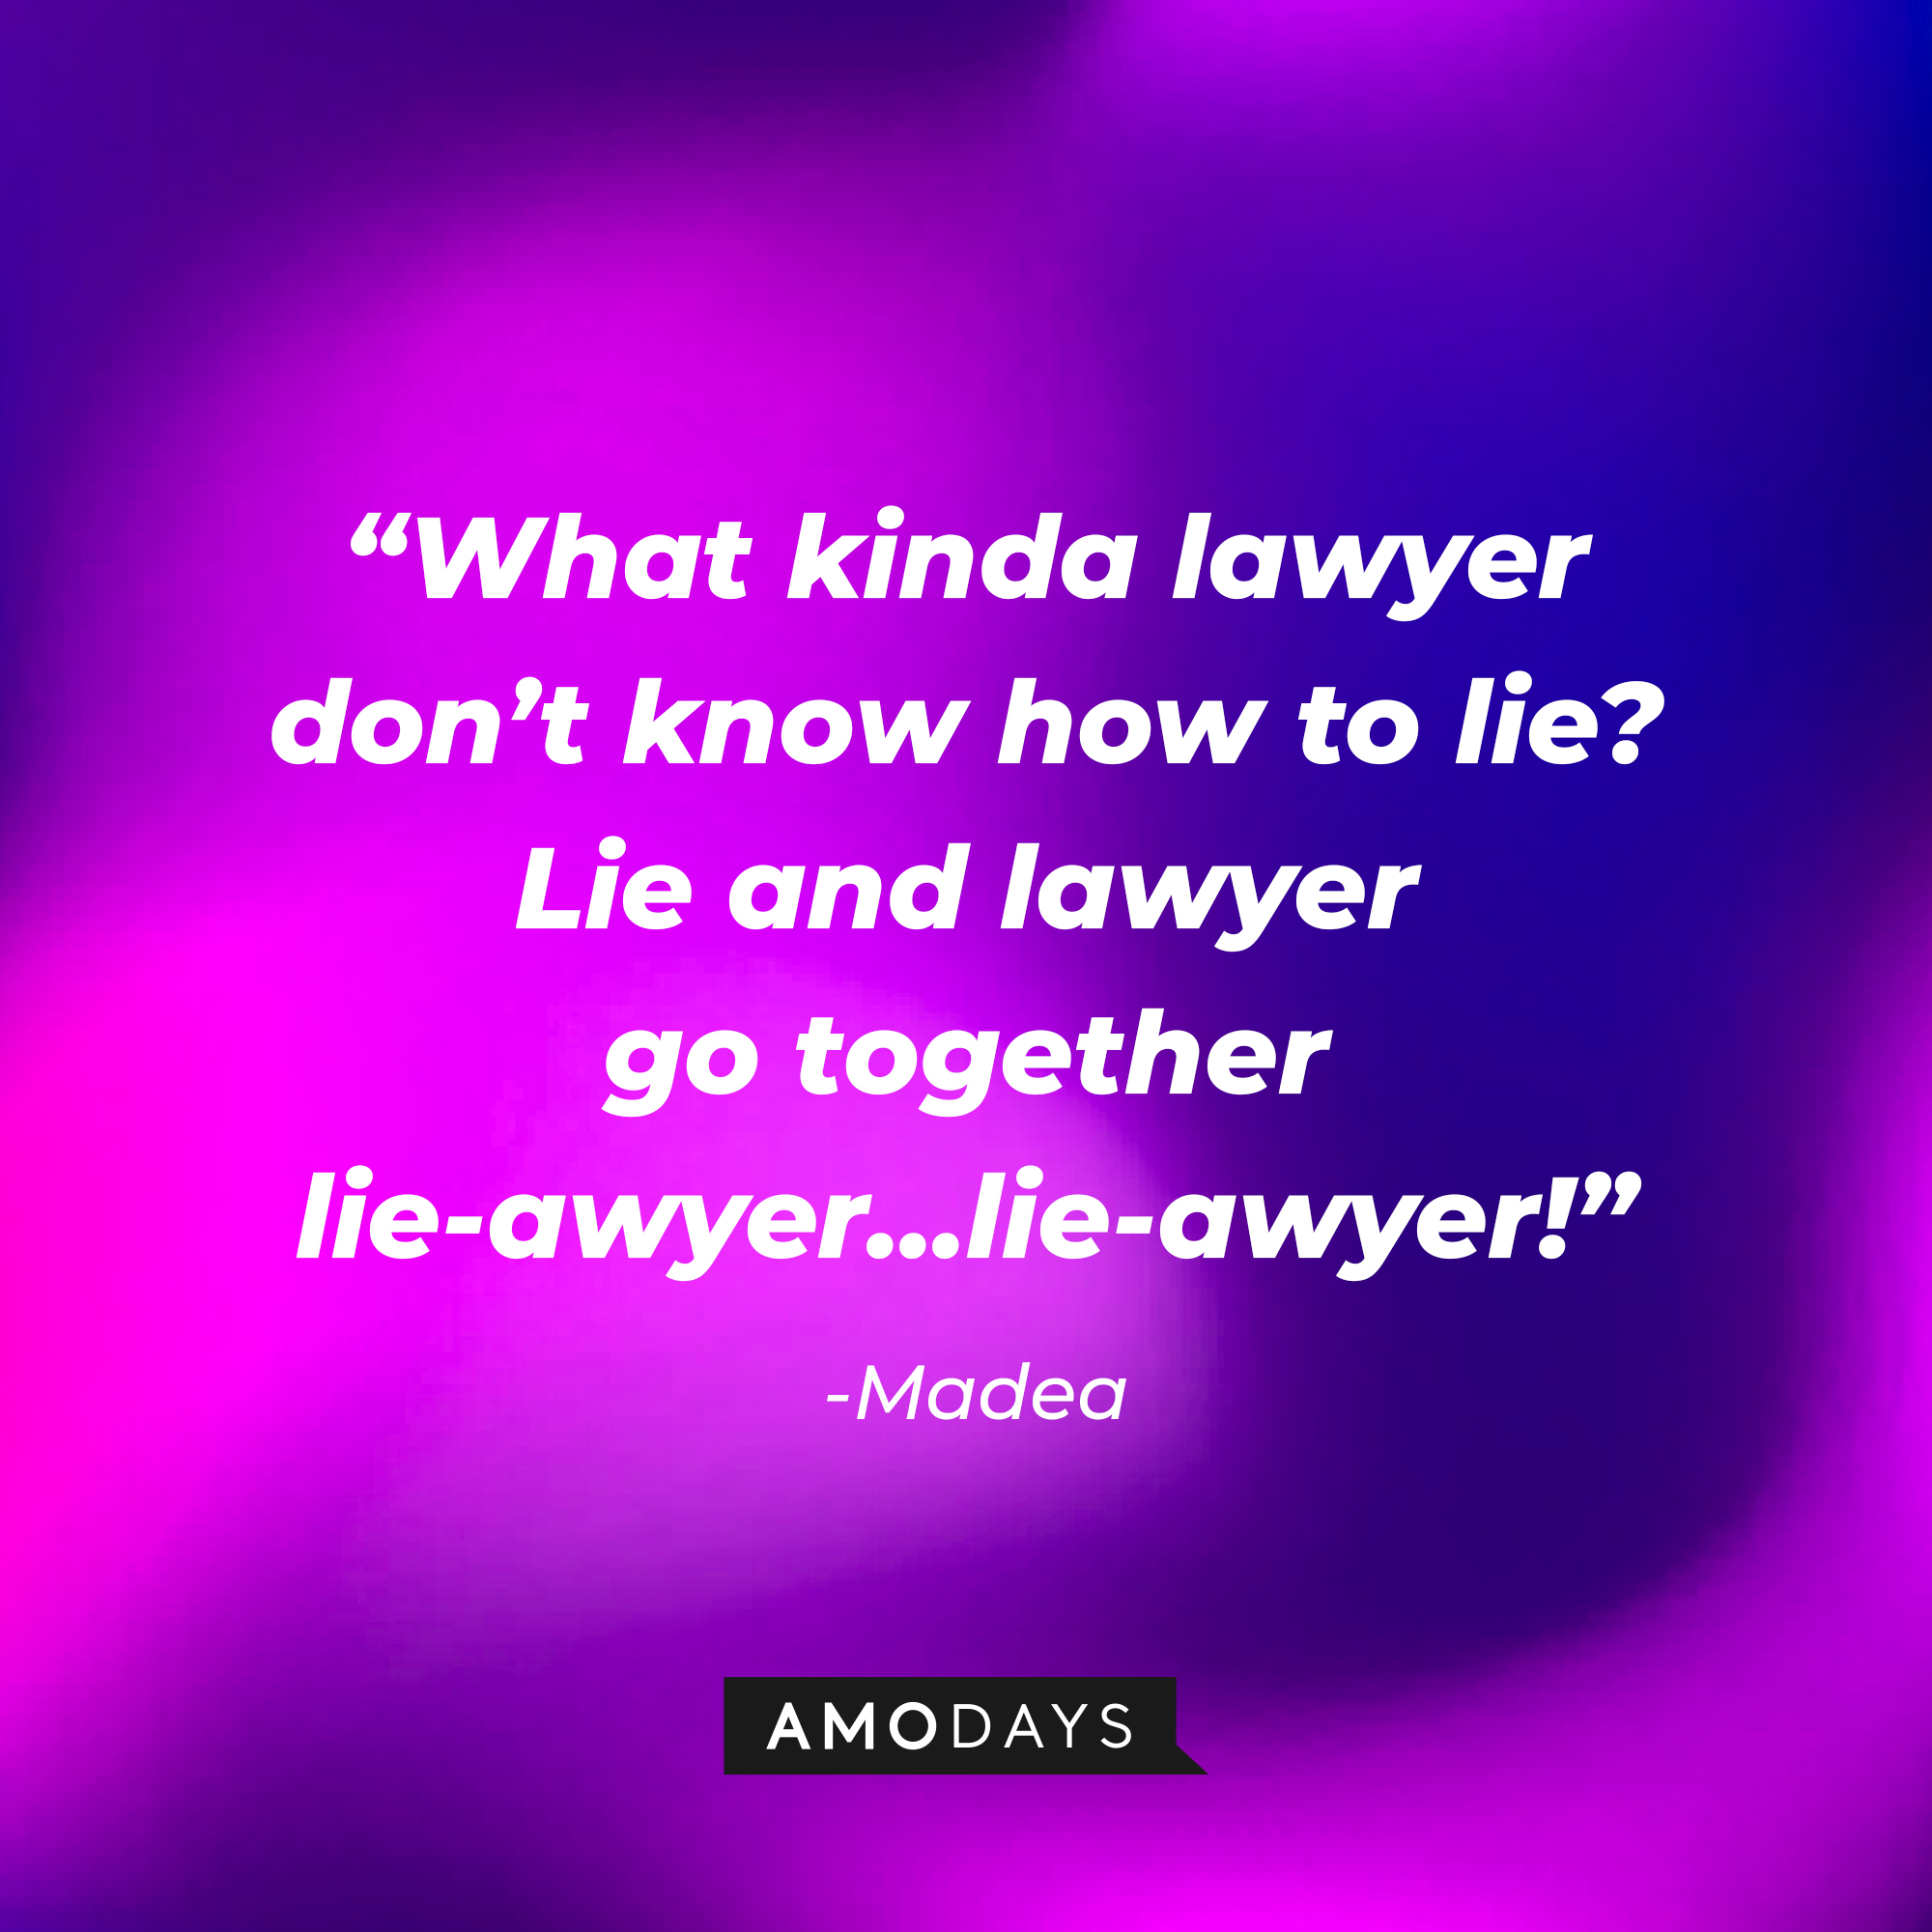 Madea’s quote: “What kinda lawyer don’t know how to lie? Lie and lawyer go together lie-awyer…lie-awyer!” | Source: AmoDays